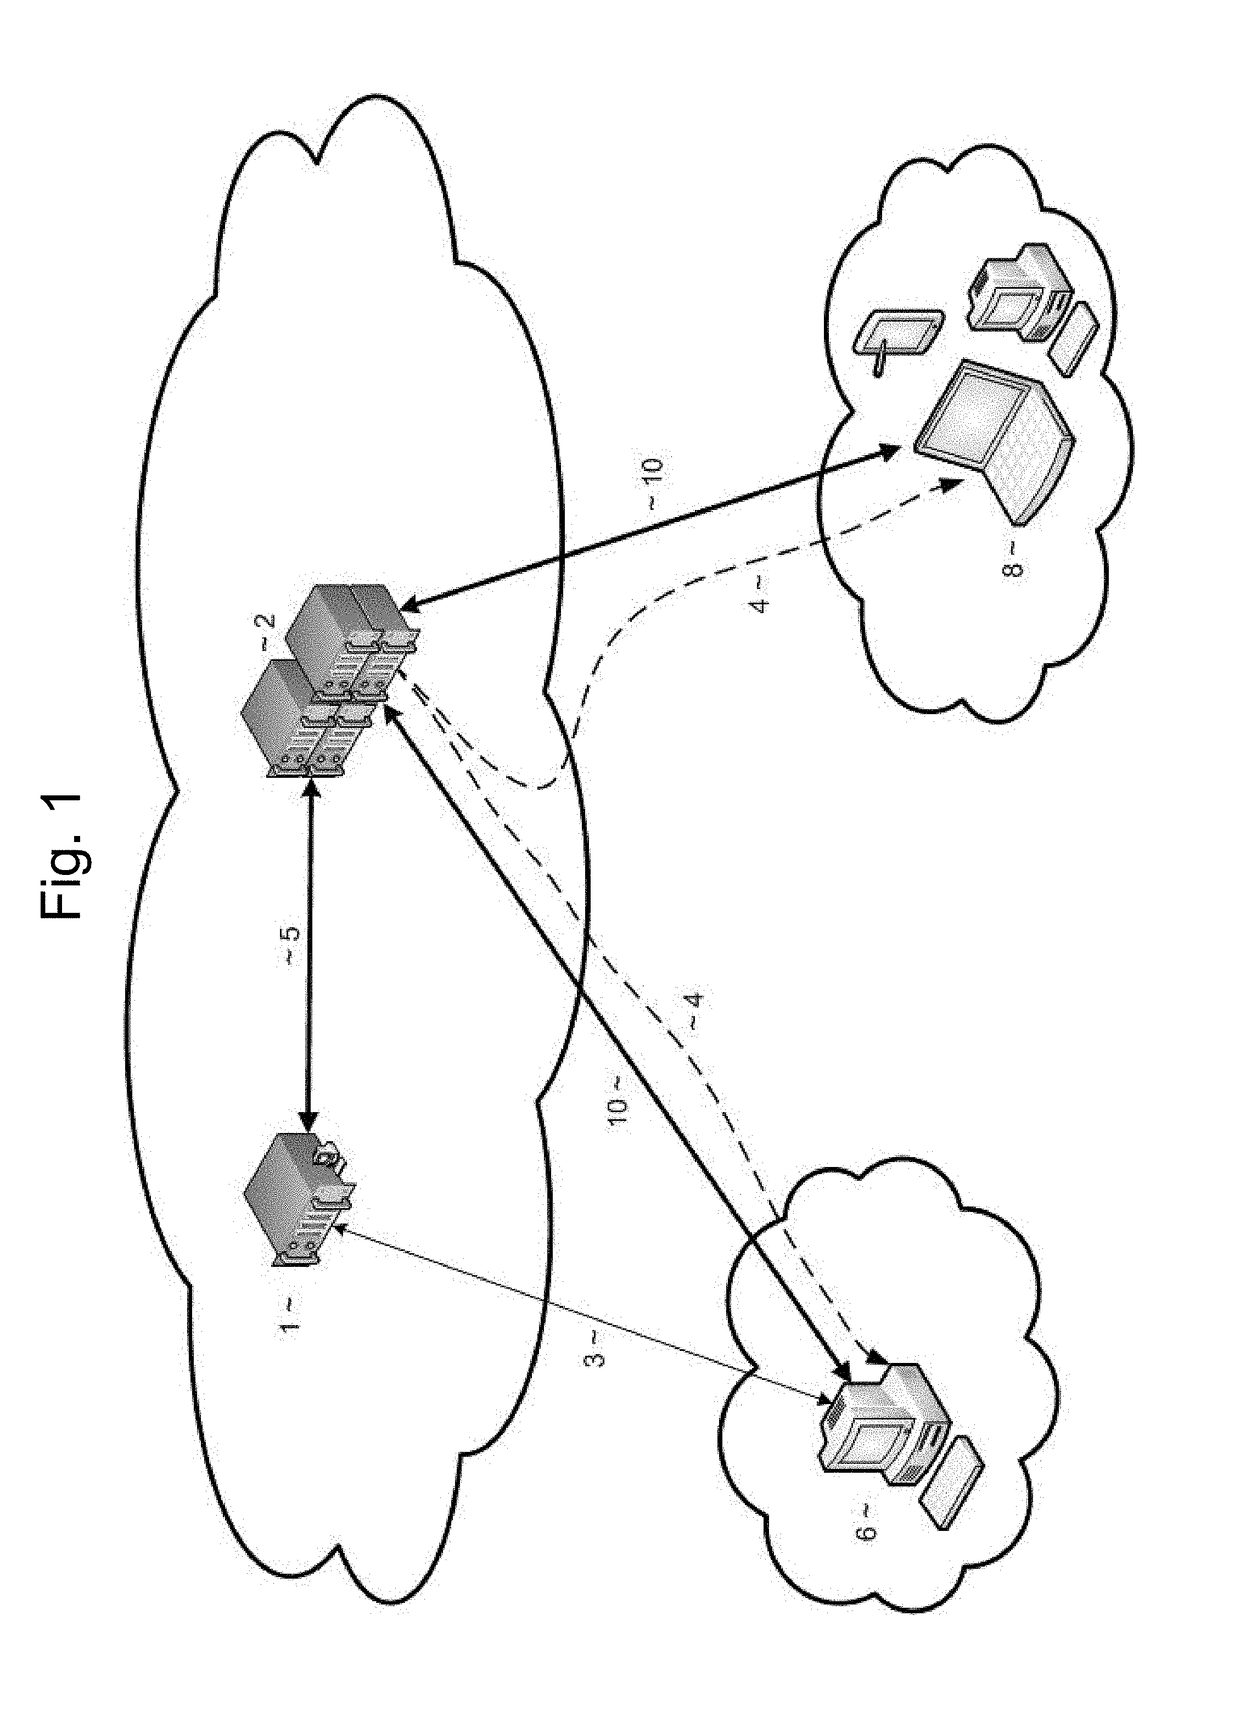 Systems and methods for remote forensics and data security services over public and private networks